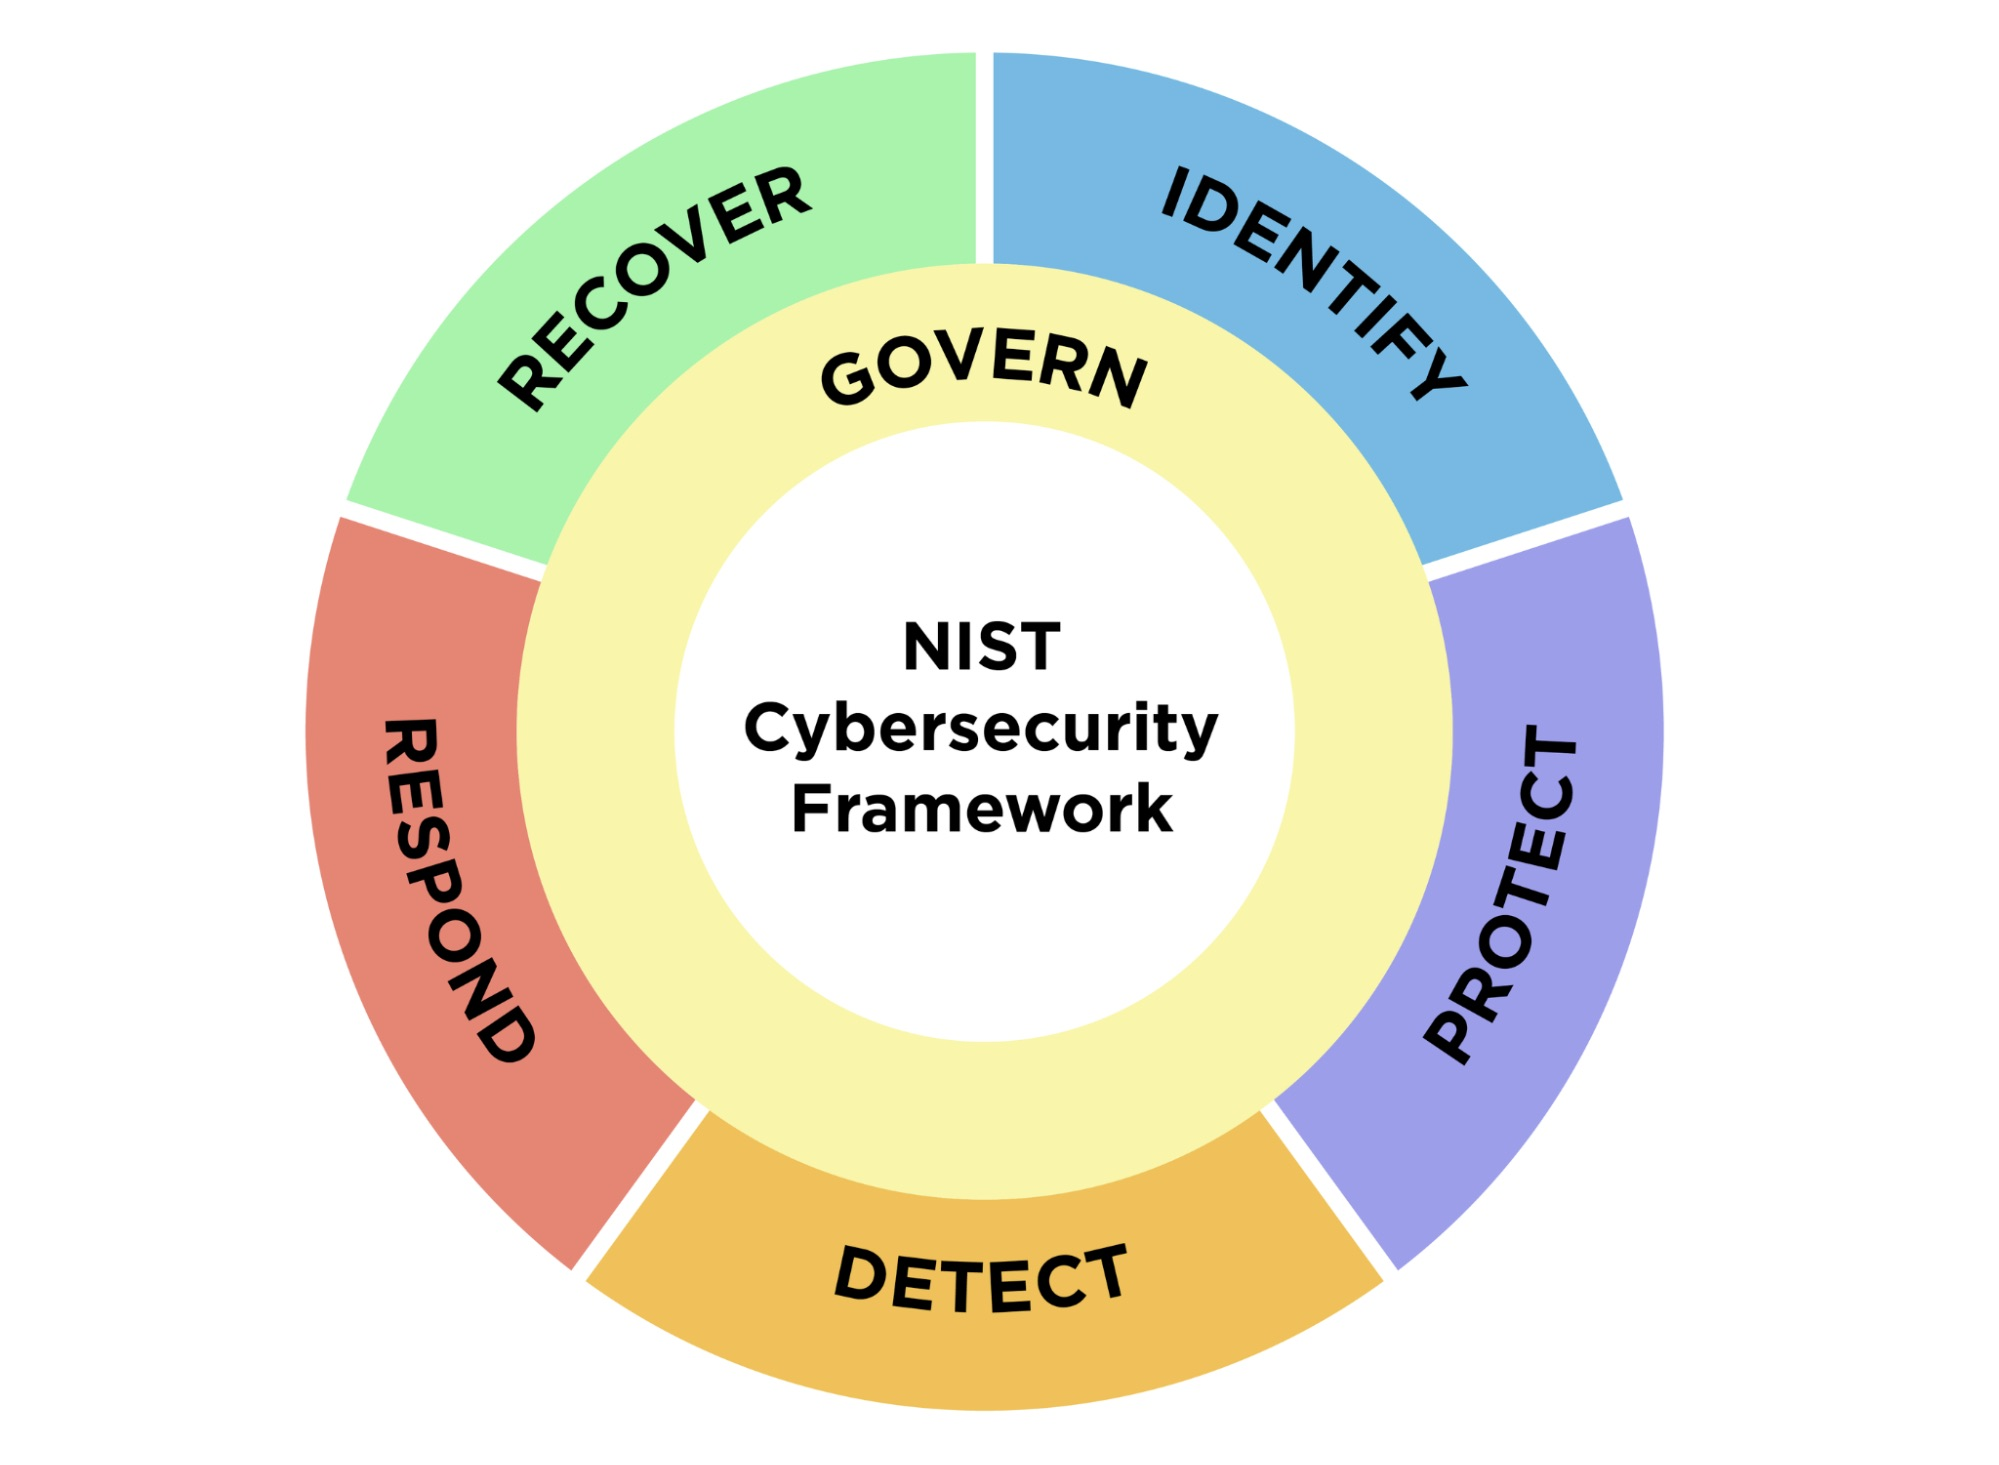 NIST’s Cybersecurity Framework 2.0 places stronger emphasis on governance, features broader scope